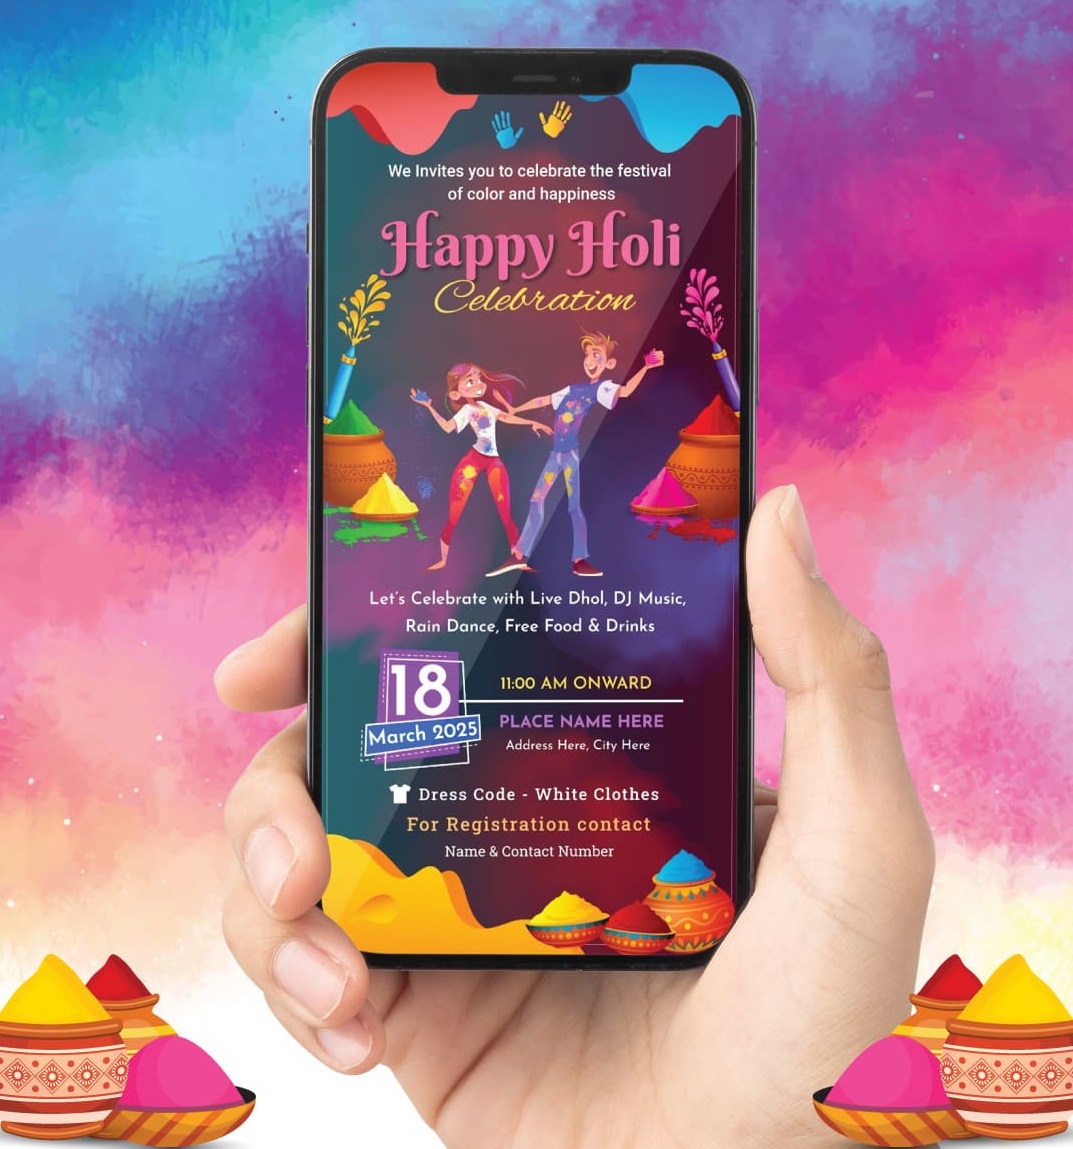 #Holi101: How To Plan At-Home Holi Party